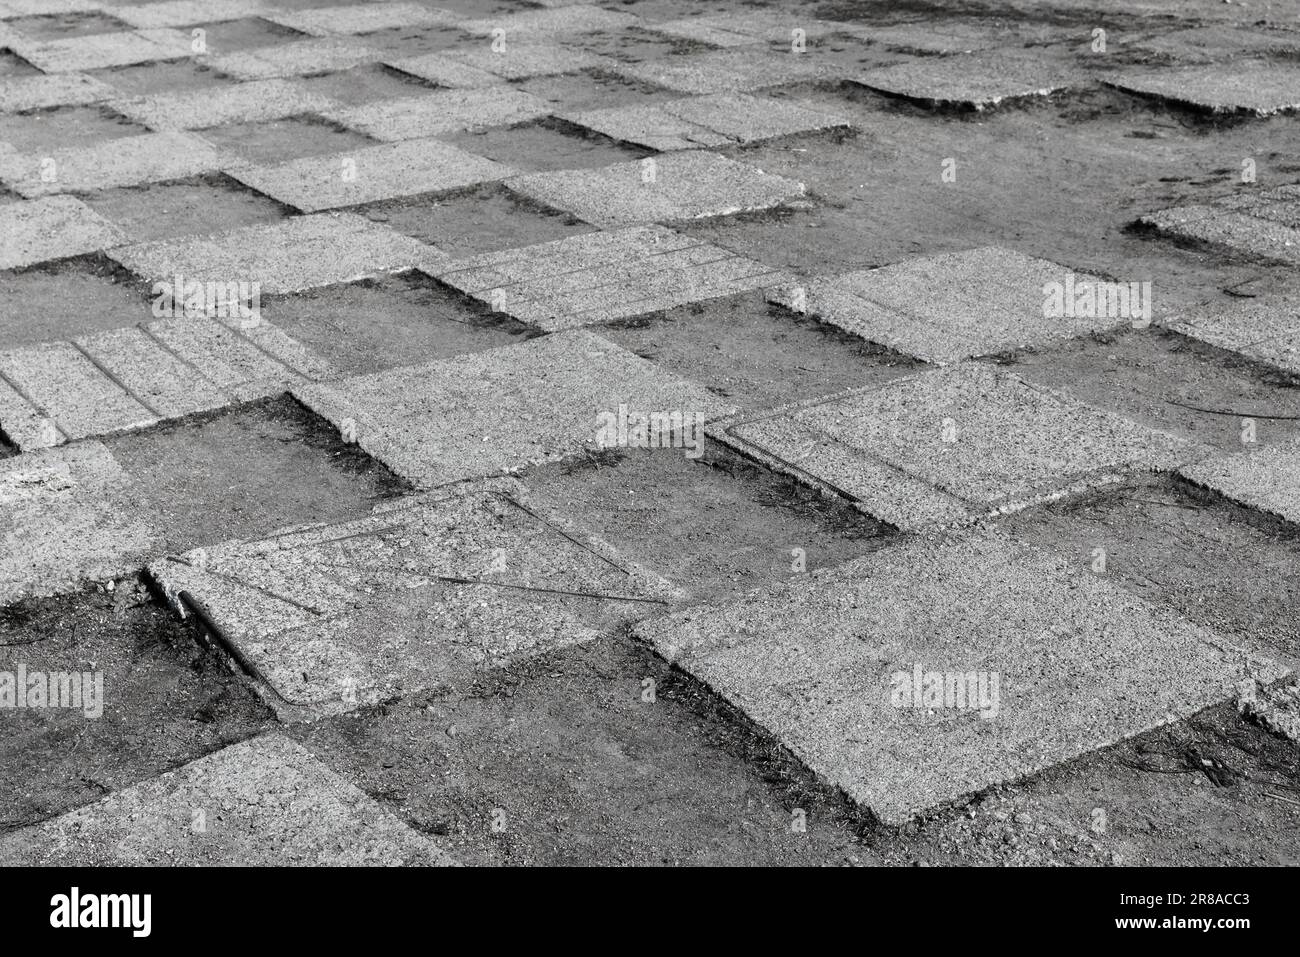 Grungy gray concrete tiles of an urban pavement lay on dusty ground in checker pattern, abstract architecture background photo Stock Photo